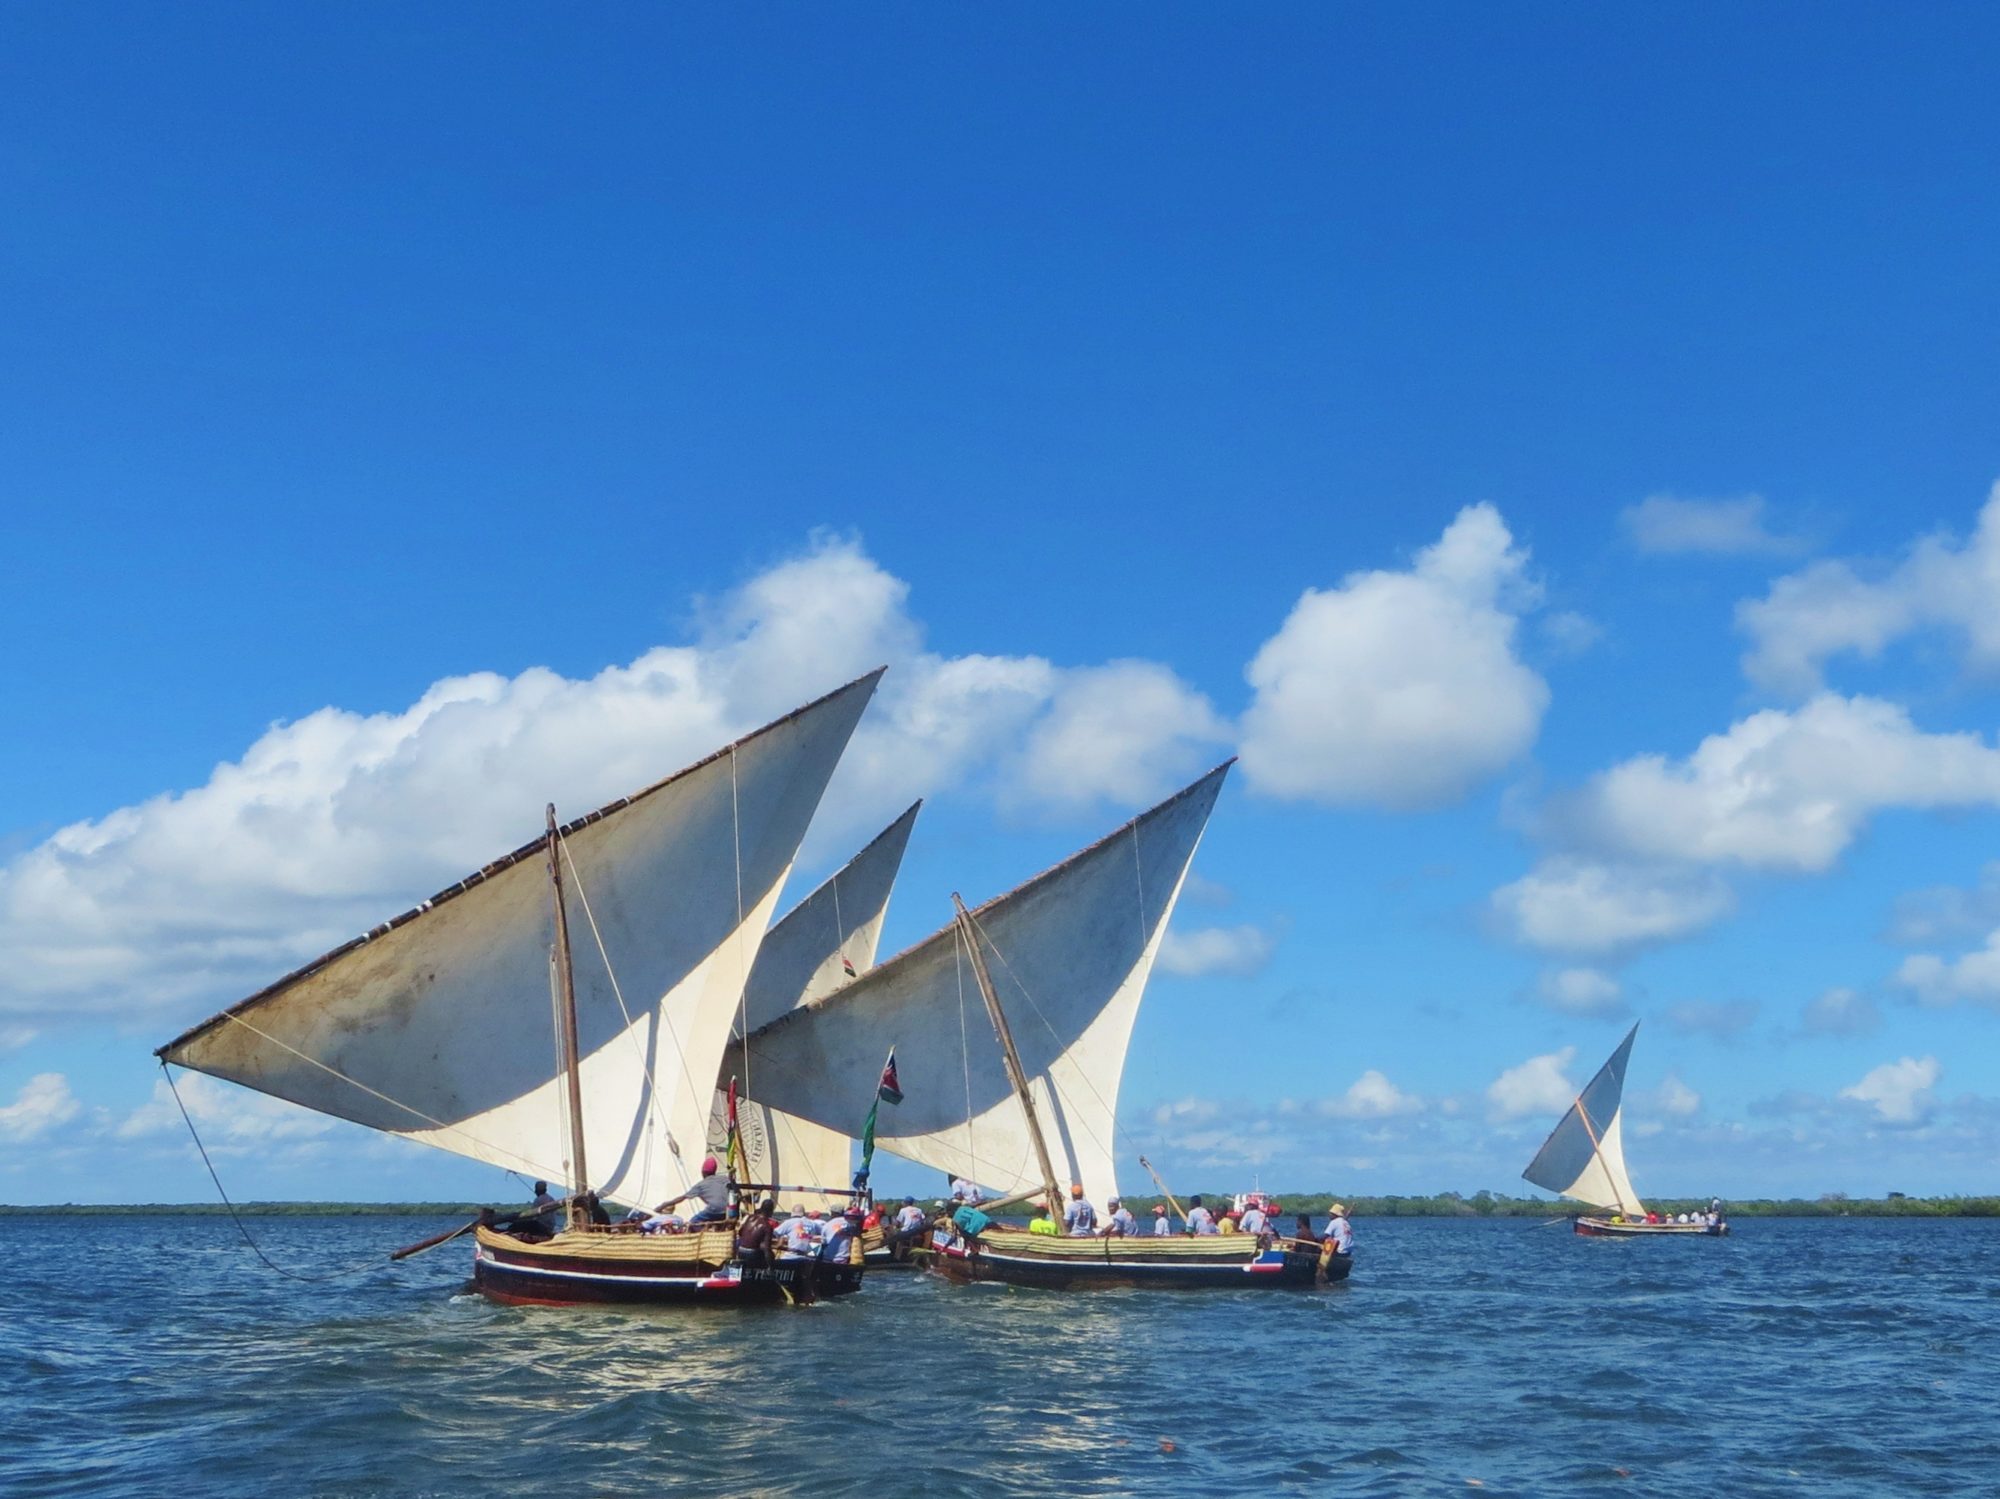 Mawlid festival, a dhow boat race at Lamu, a Chinese-built port in Kenya